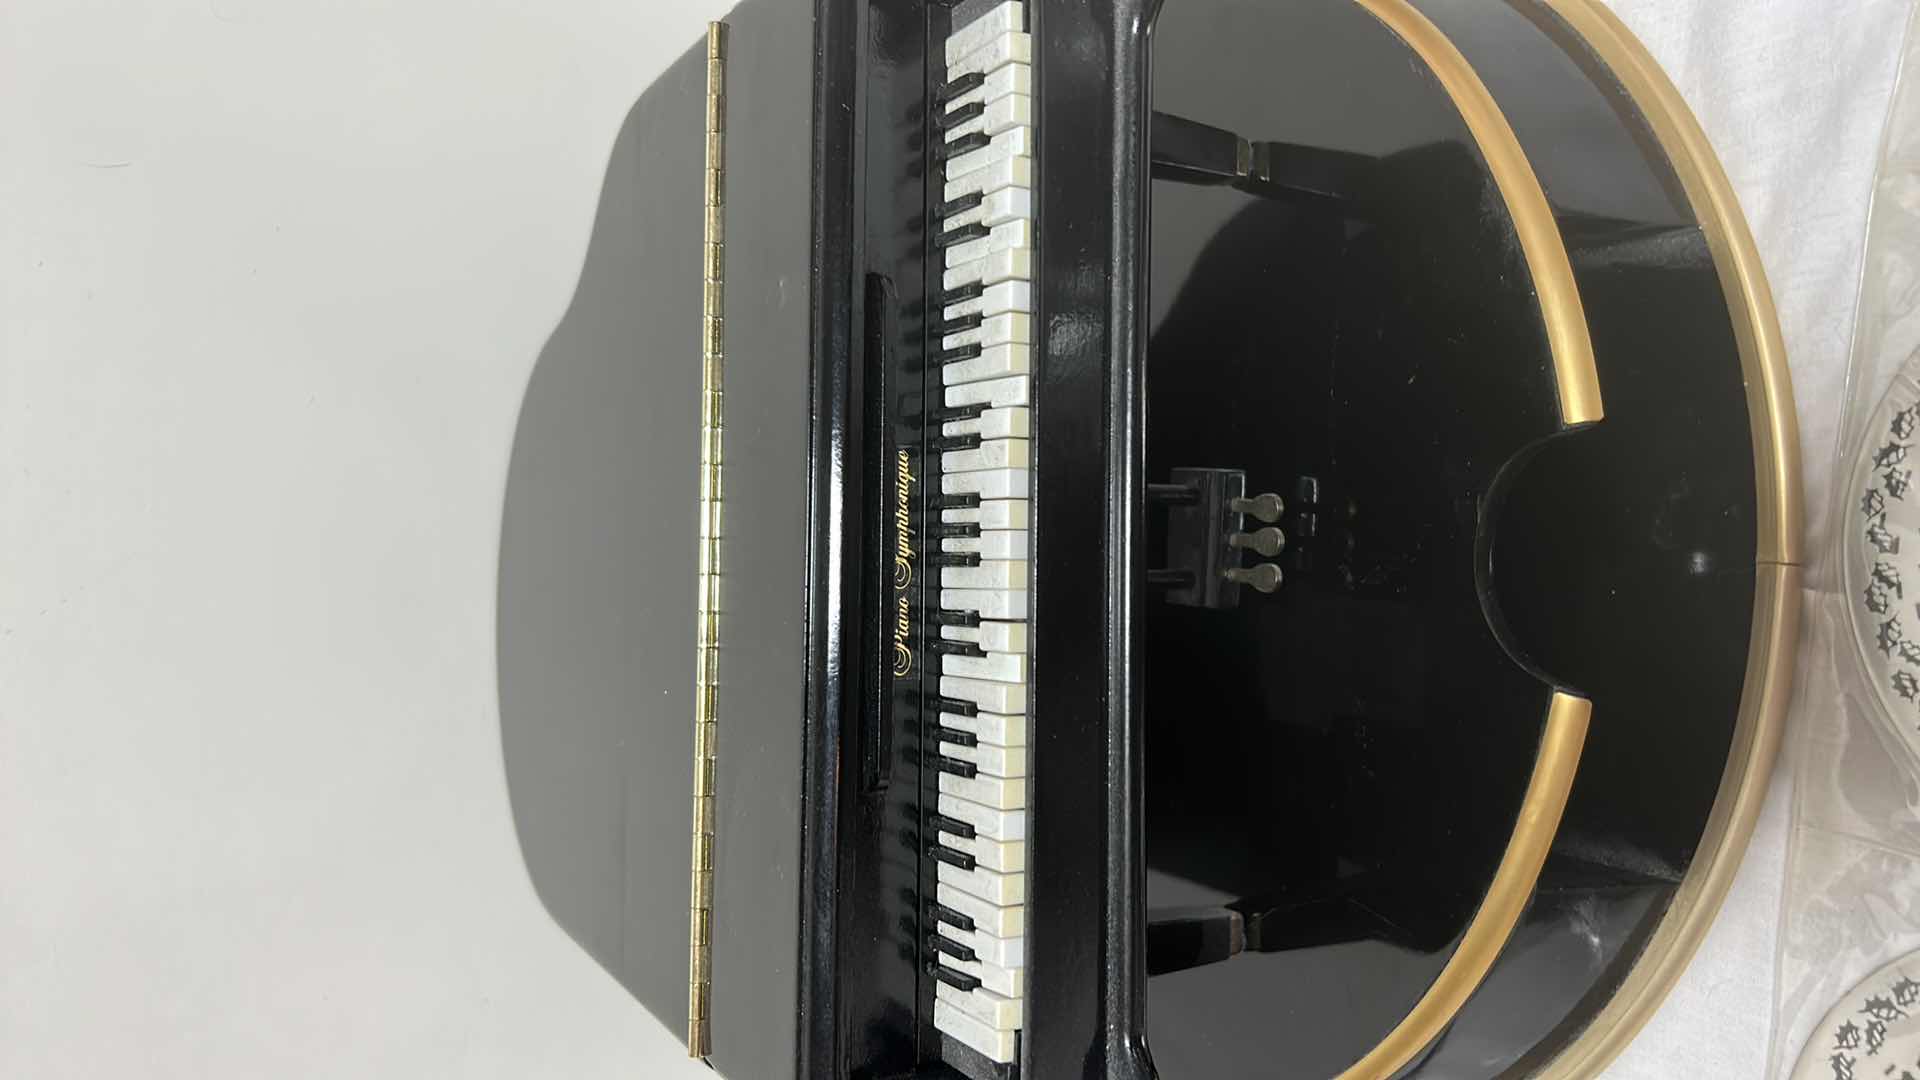 Photo 4 of MINI GRAND PLAYER PIANO WITH 10 SONGS (WORKS BEAUTIFULLY)